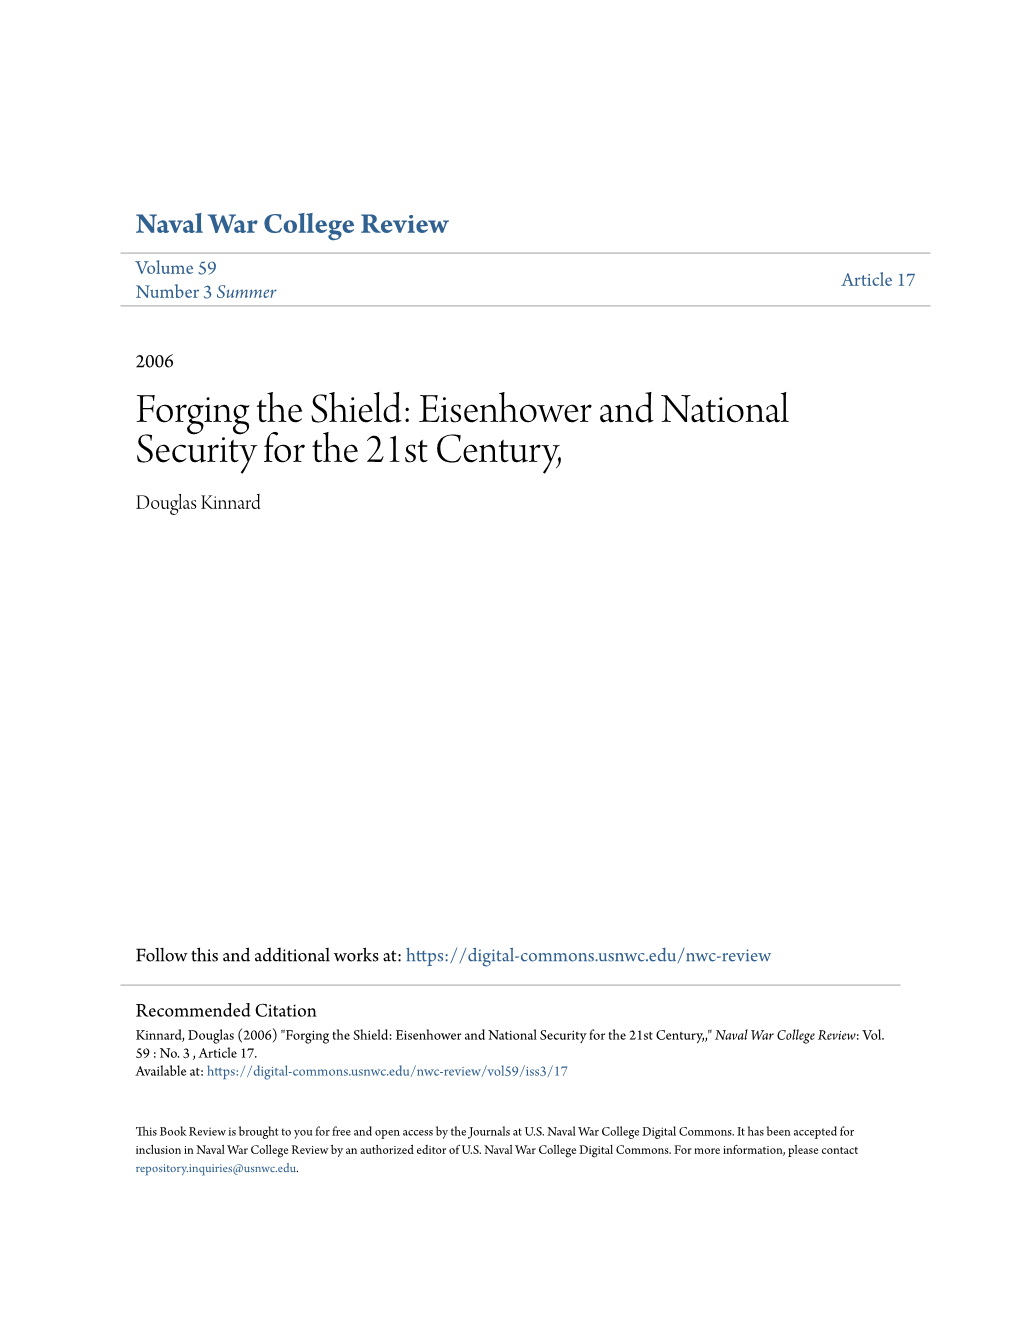 Forging the Shield: Eisenhower and National Security for the 21St Century, Douglas Kinnard